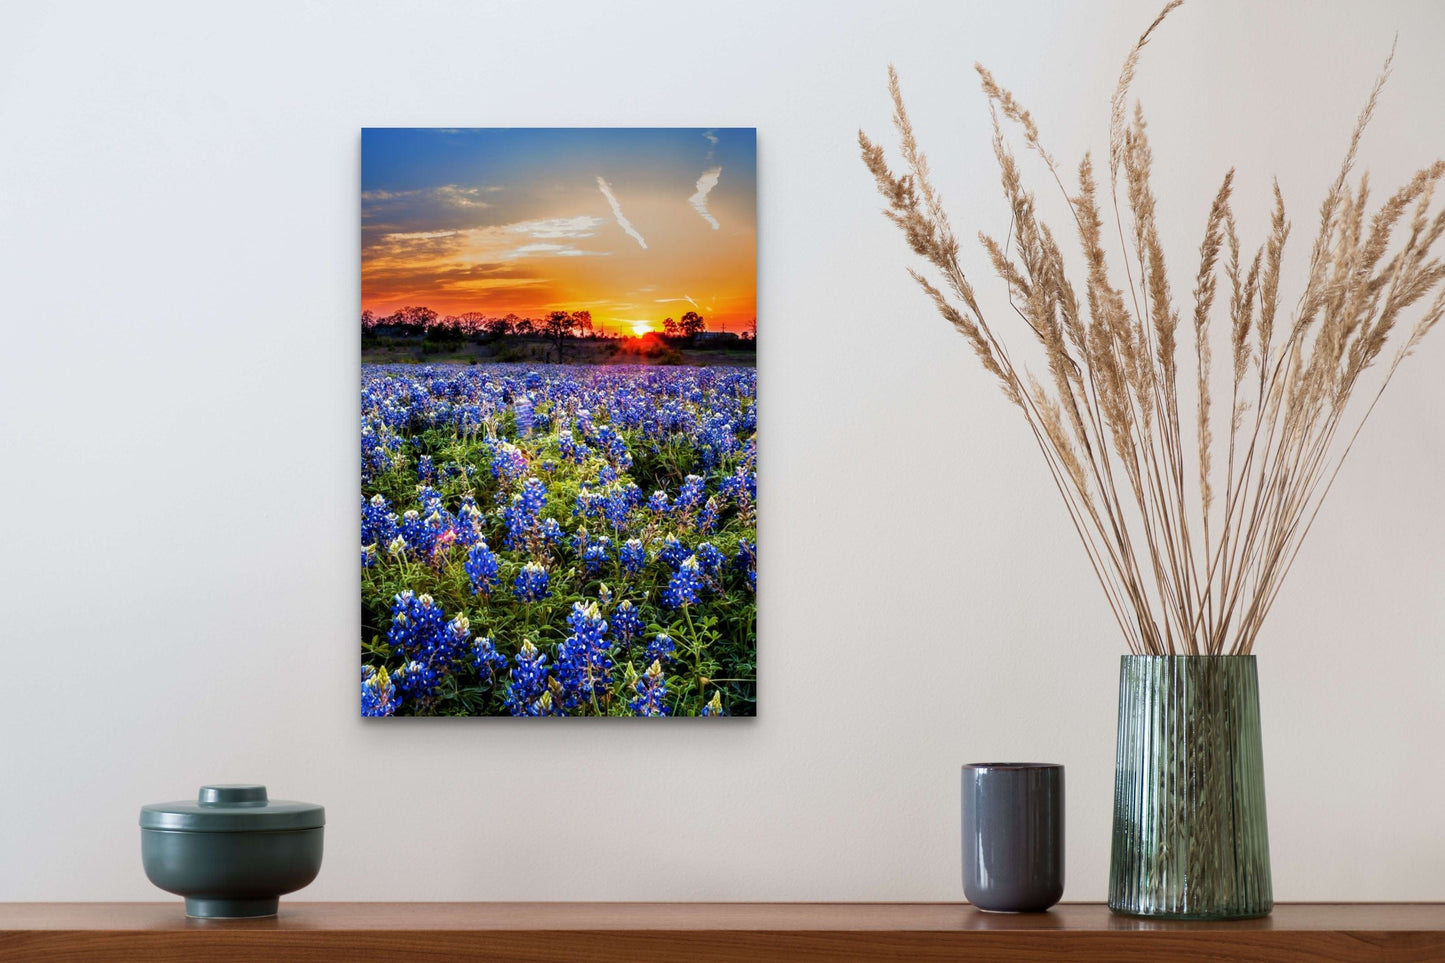 Wimberley Puzzle Company Posters, Prints, & Visual Artwork A Bluebonnet Sunset, Texas, Bluebonnets and Wildflowers Wood Art and Postcards